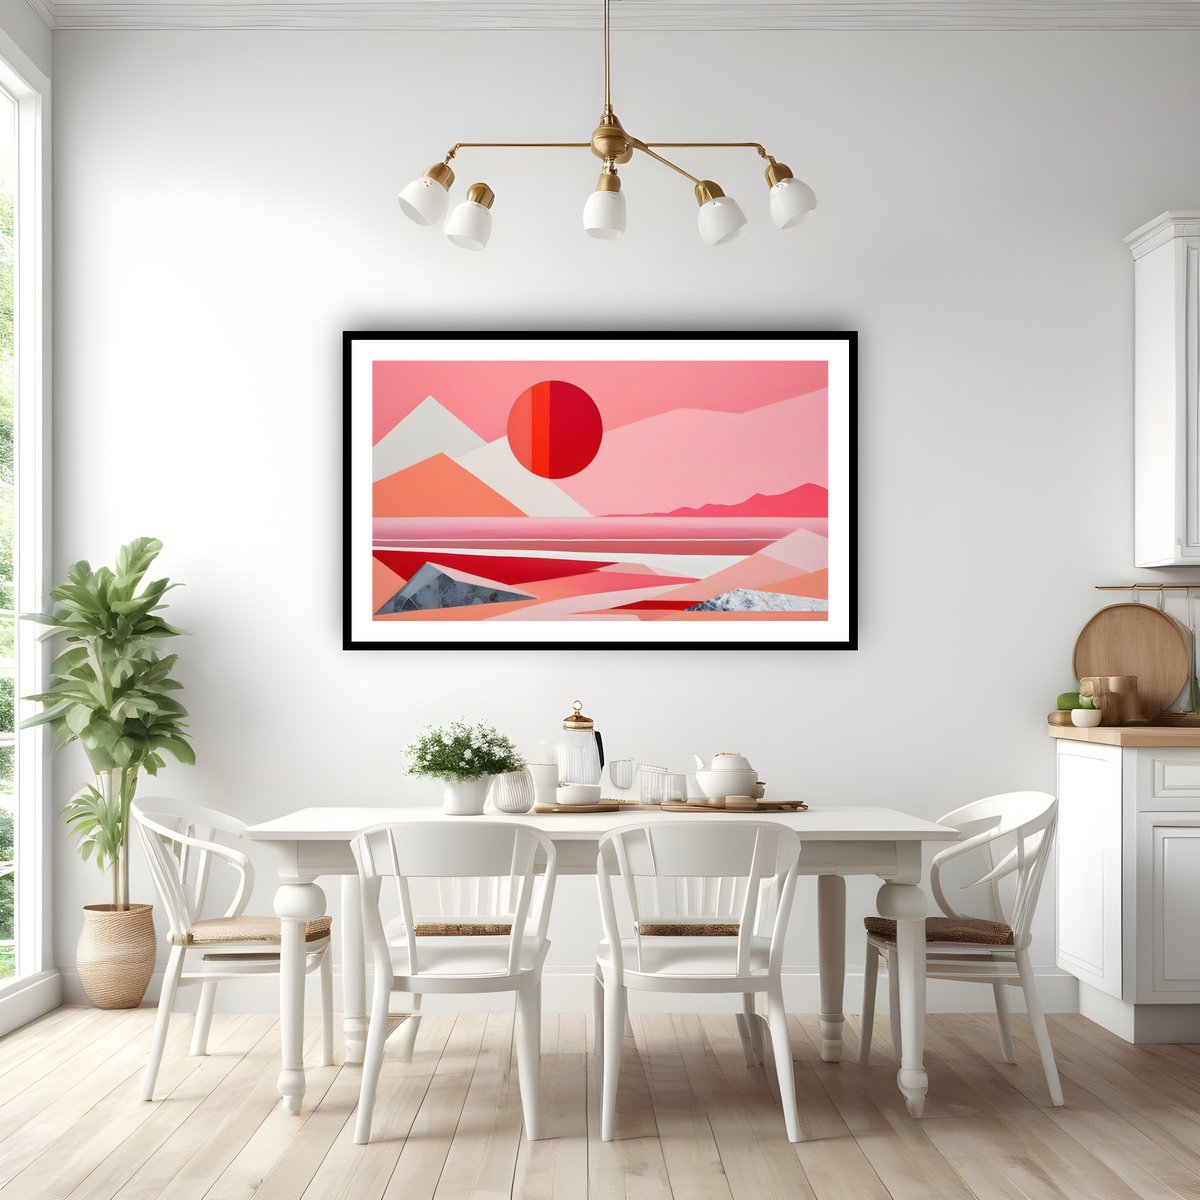 fineartamerica.com/featured/abstr…
#Abstract #abstractpainting #reddesert #red #abstractartists #abstractexpressionism #abstractaddict #fineart #fineartamerica #poster #homedecor #Wallpapers #WallArtForSale